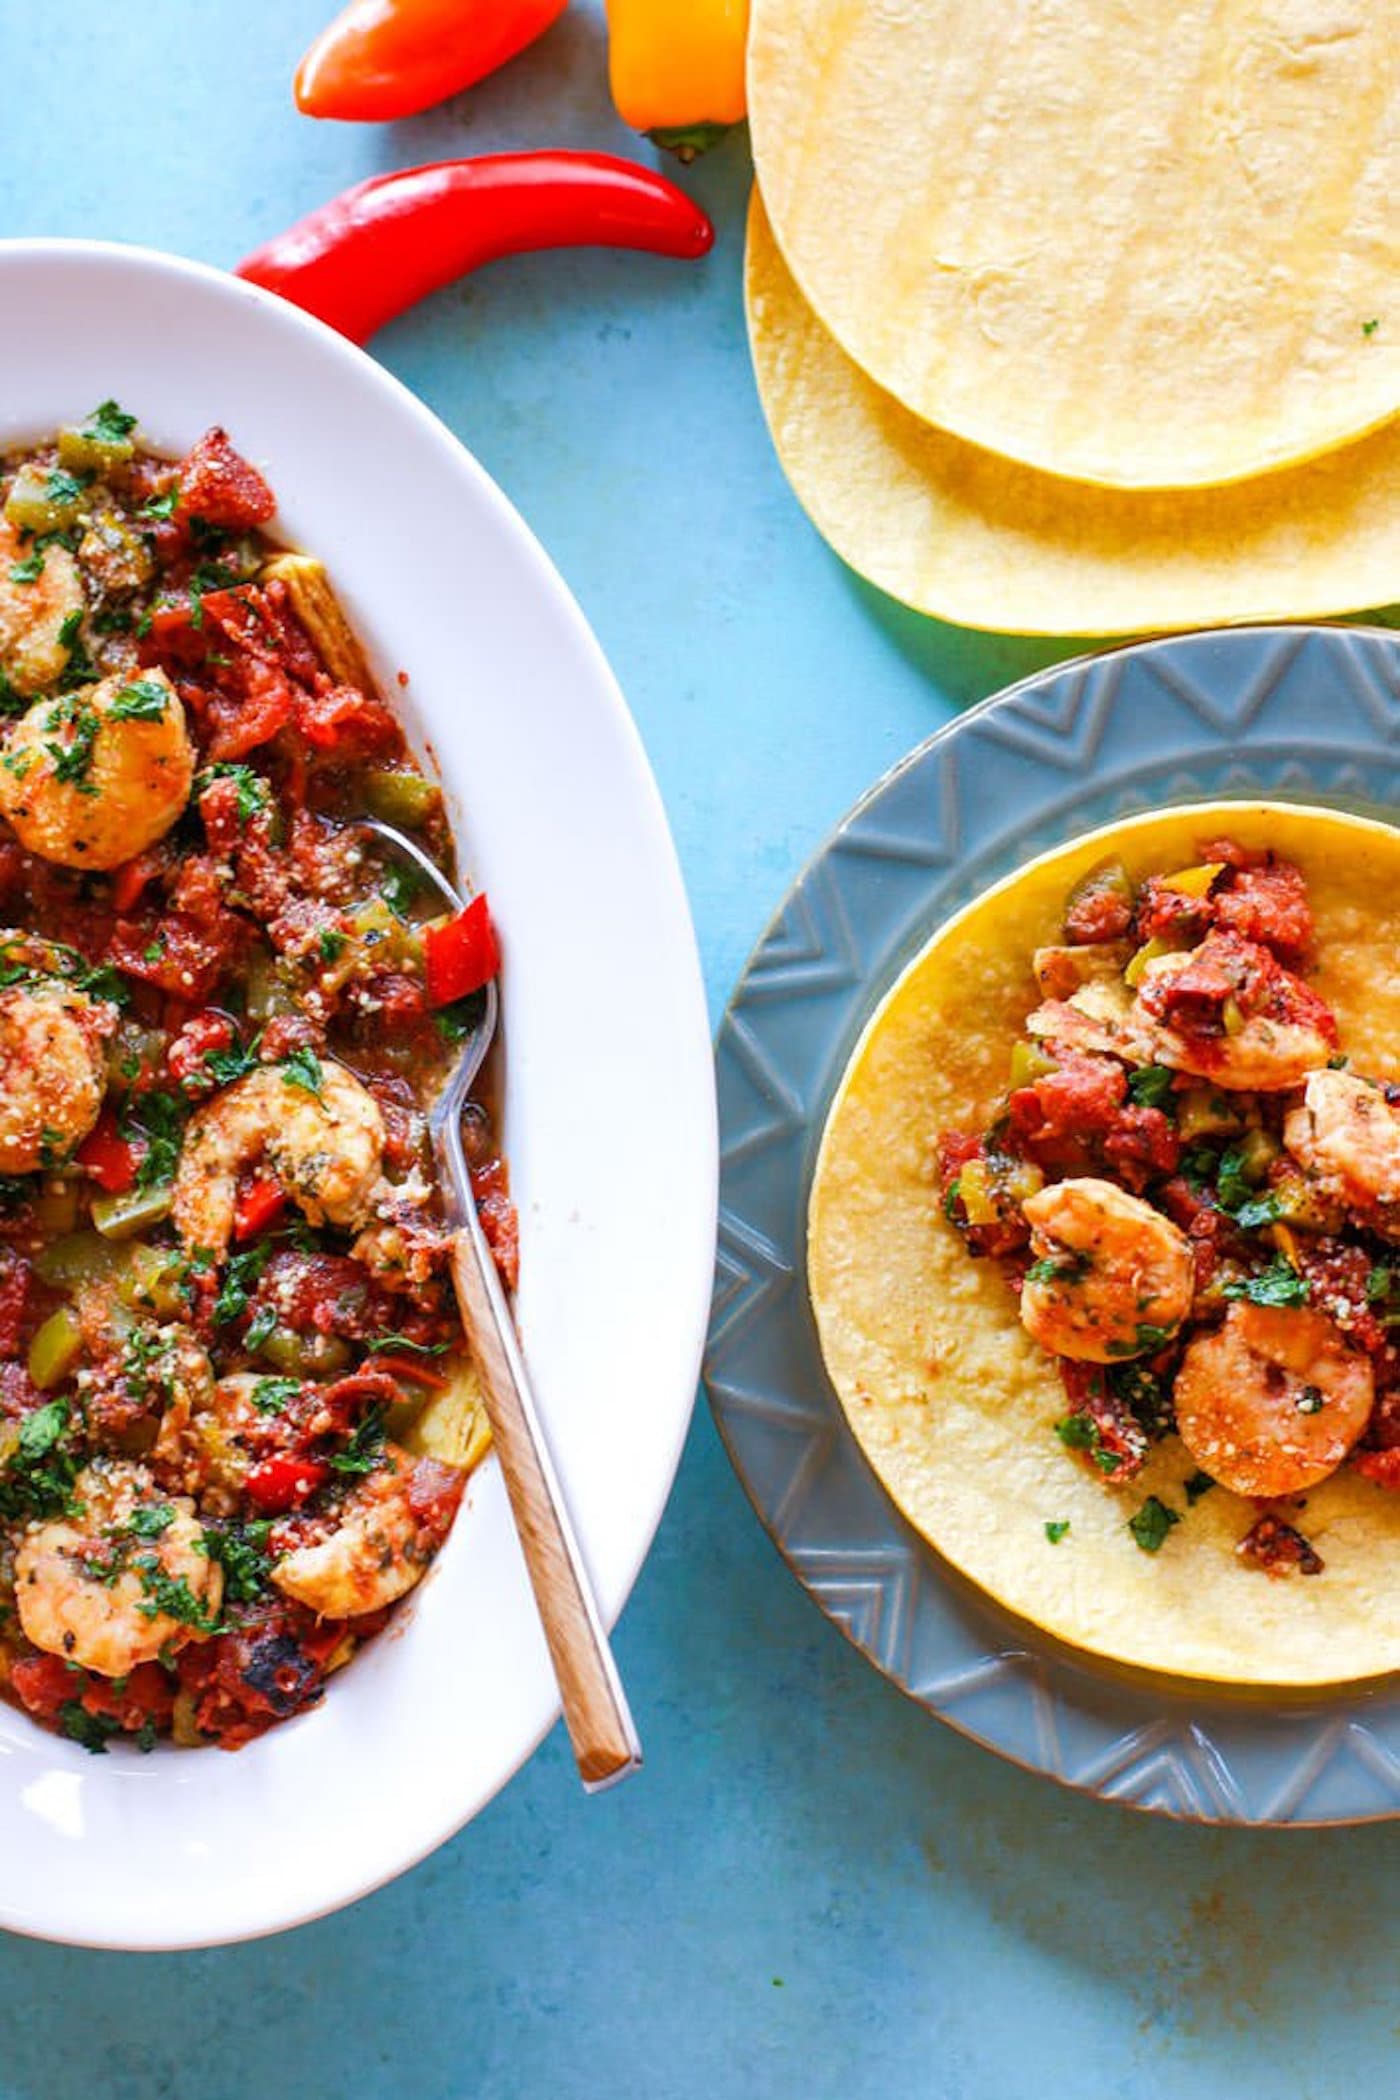 Gluten Free Crock Pot Fire Roasted Shrimp Tacos! We love making crock pot tacos. This recipe requires little prep, but produces tons of flavor and nutrients! Great for busy days and easy dinners! #cottercrunch.com